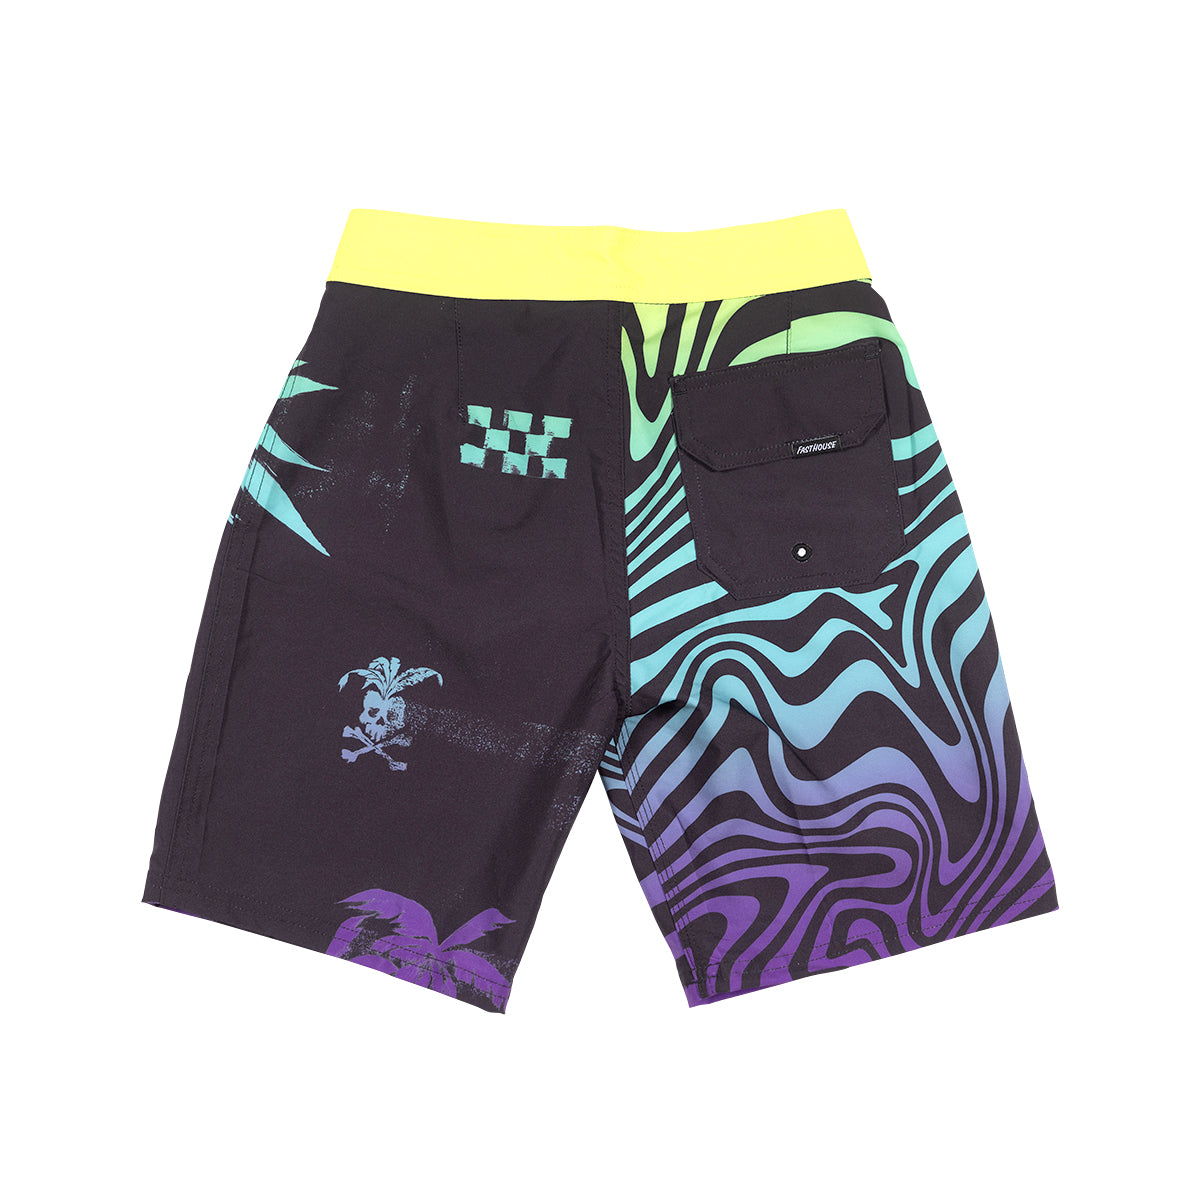 After Hours Calypso 16" Youth Boardshort